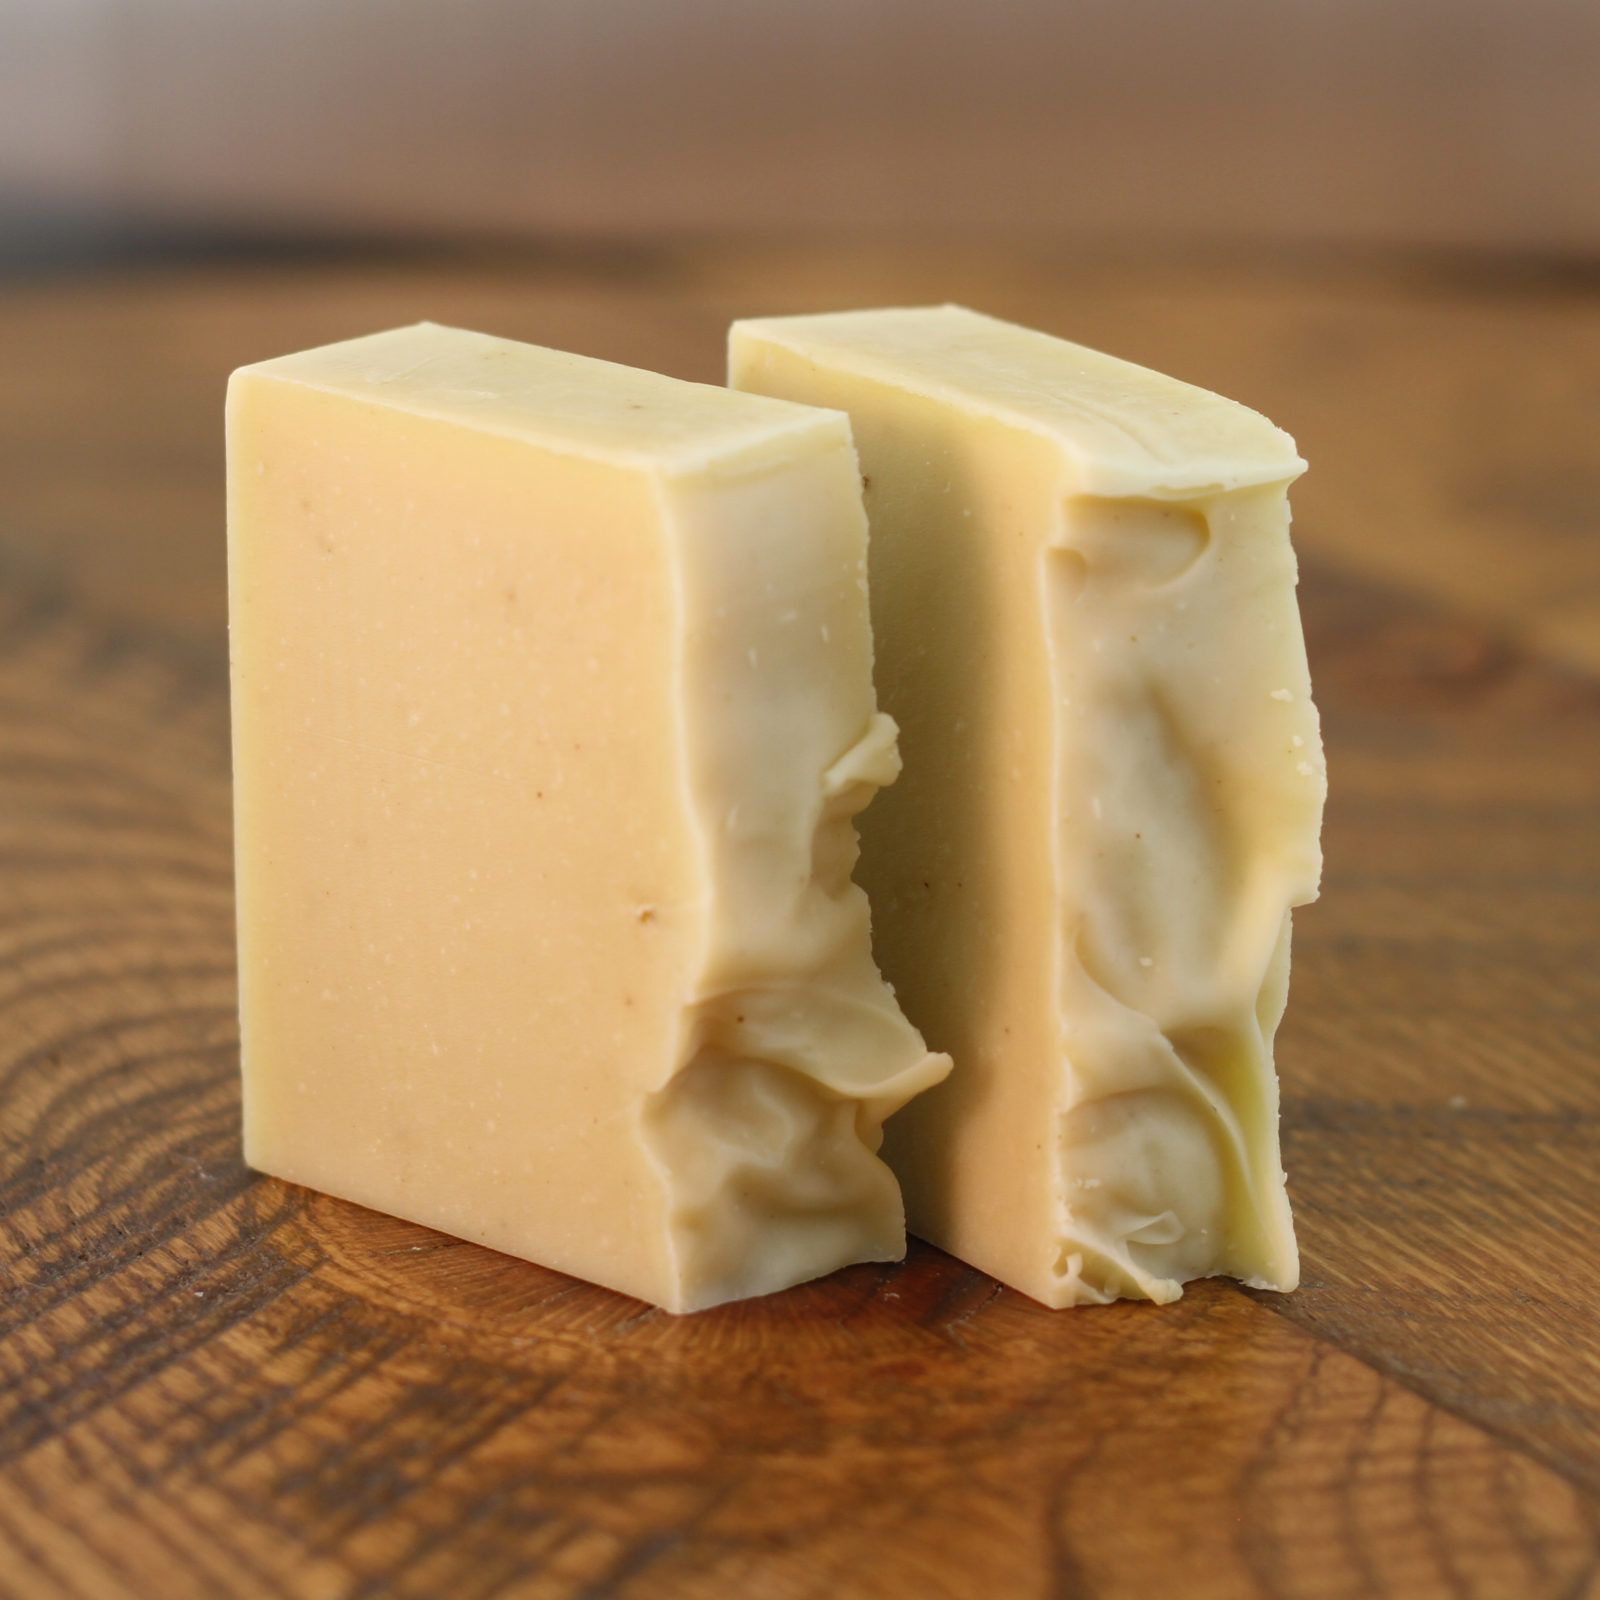 Apple Bay Unique Natural Soap for Men by Old Factory